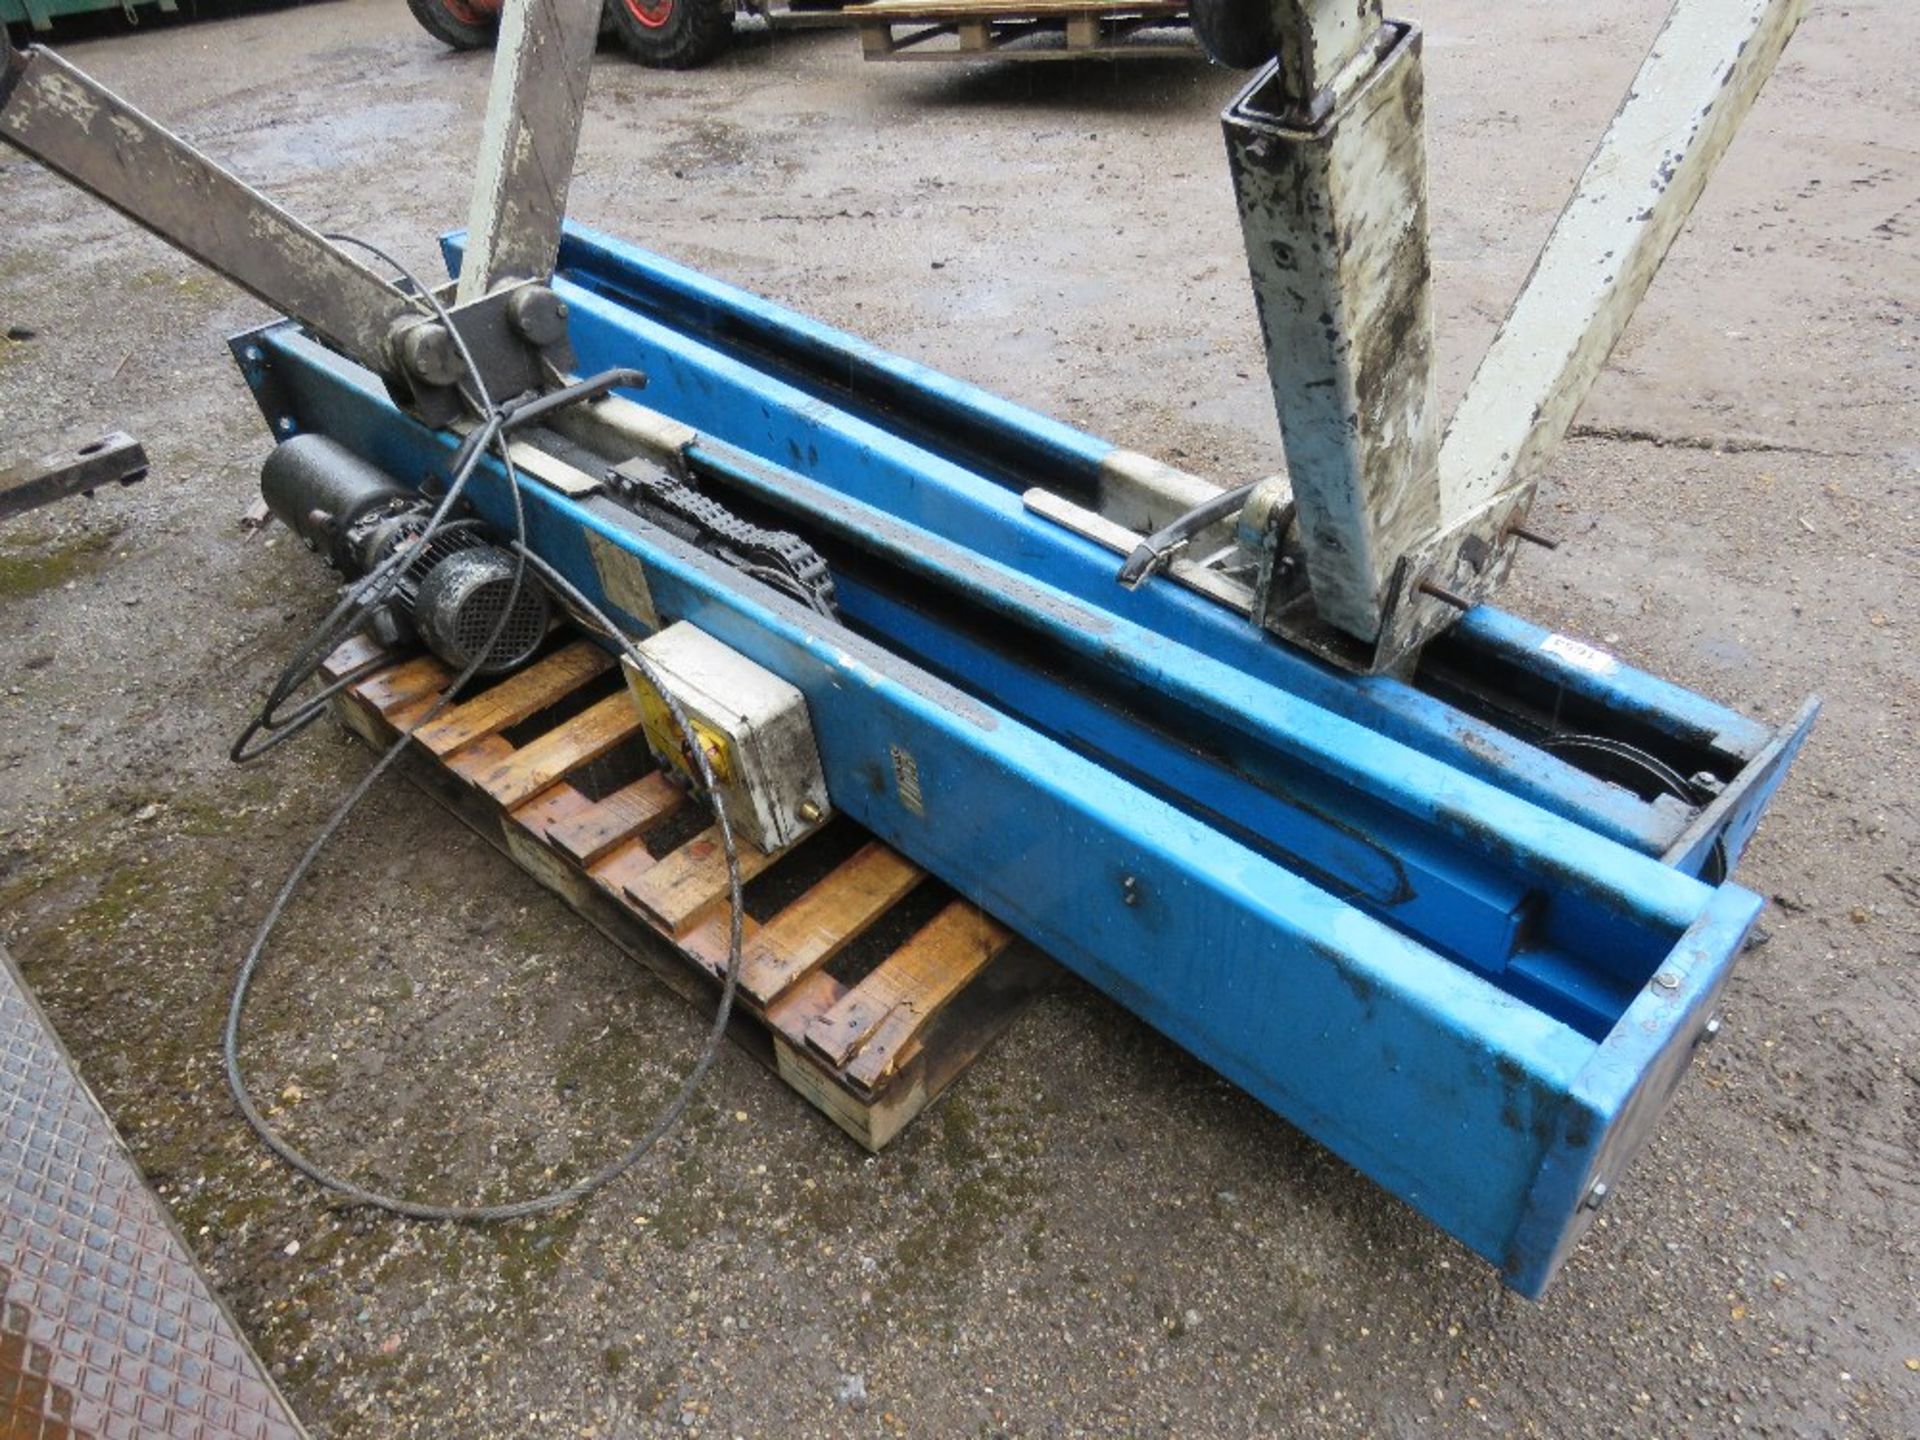 HOFFMAN 2800KG RATED 2 POST VEHICLE LIFT. WORKING WHEN RECENTLY REMOVED FROM WORKSHOP LIQUIDATION. - Image 3 of 4